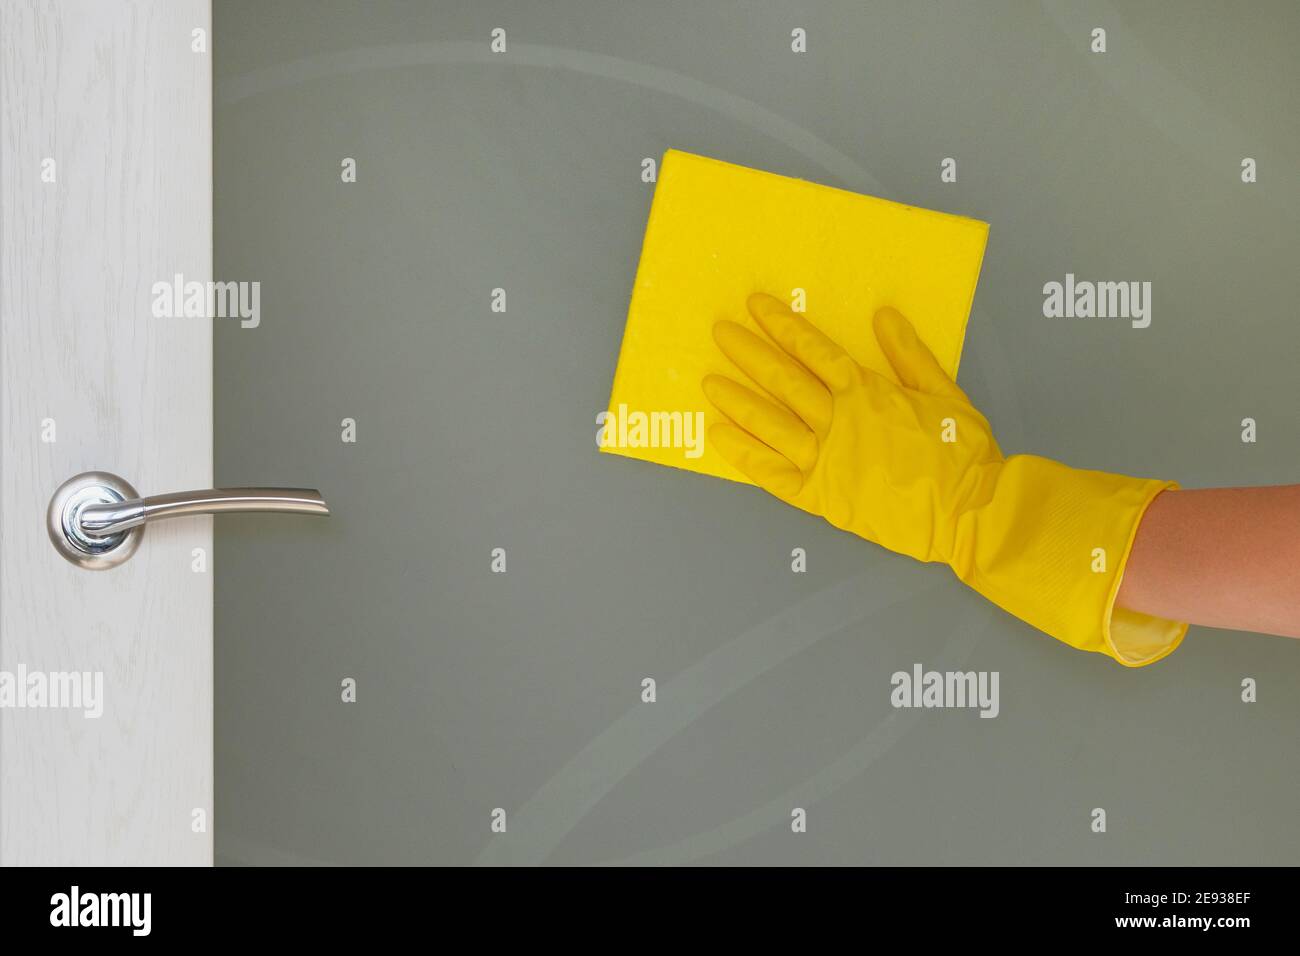 Cleaning concept in home. Female hand with yellow rag is wiping glass door at home. Housework and housekeeping concept. Stock Photo